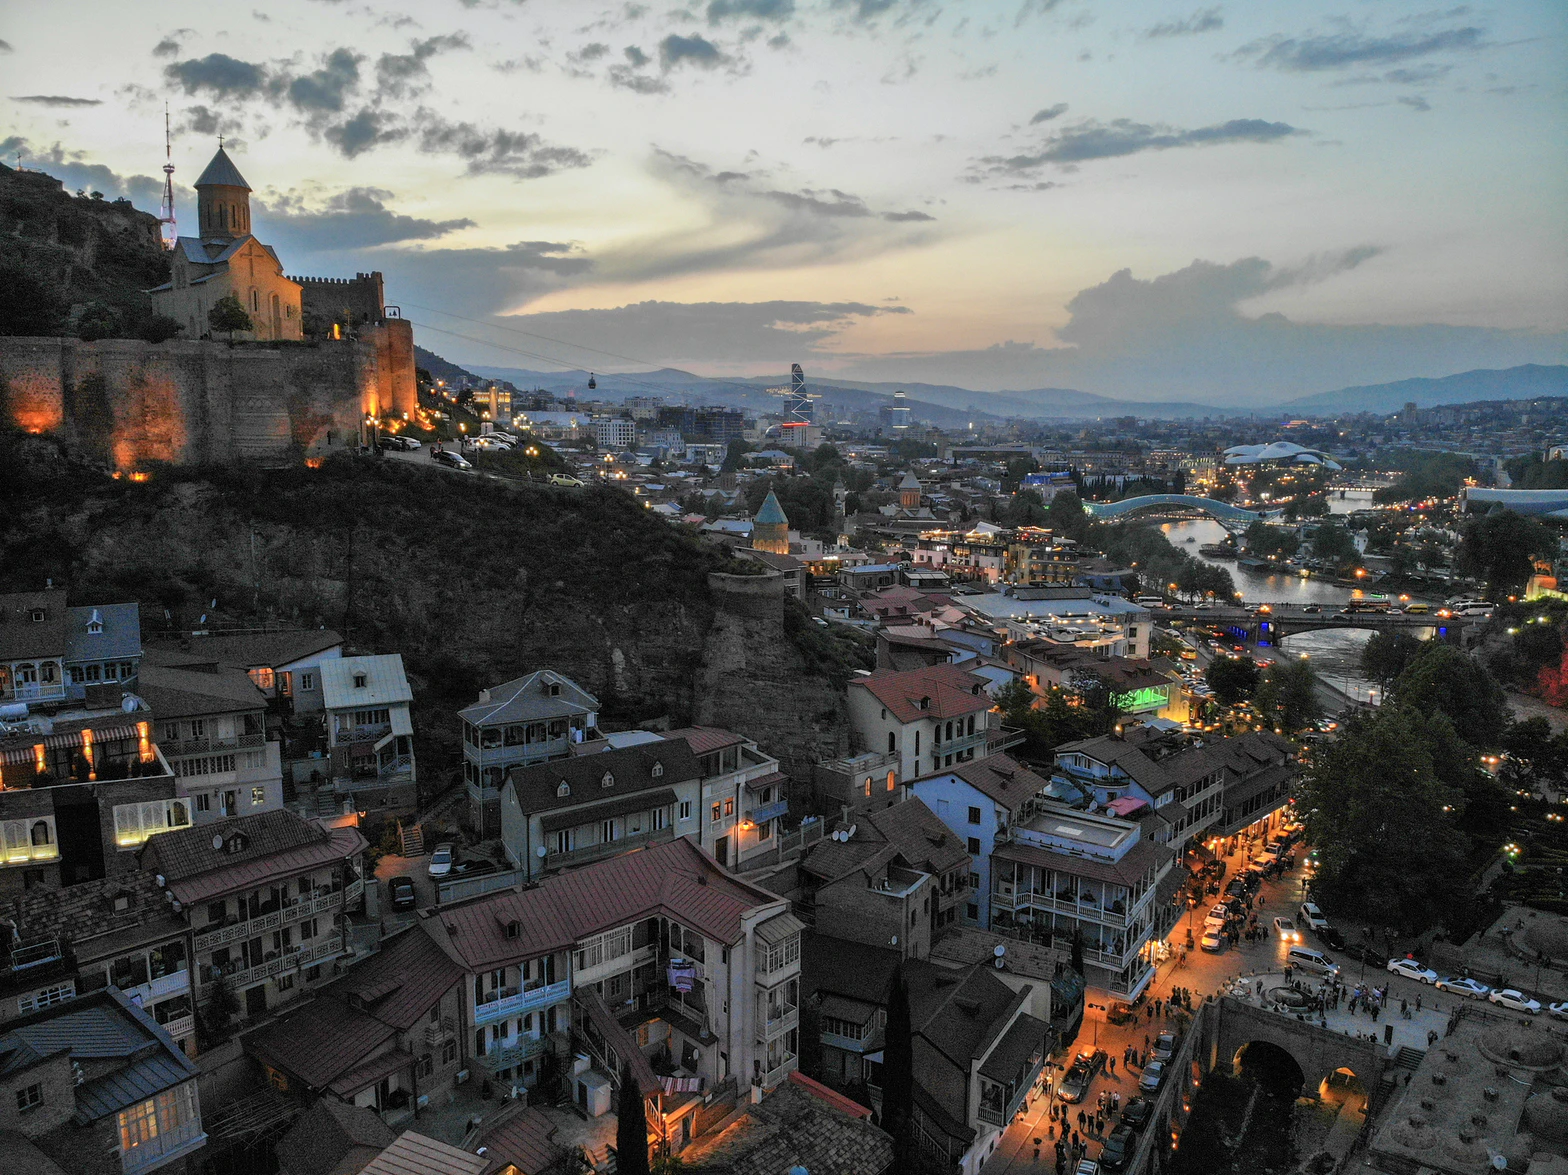 Sun setting over Tbilisi, Georgia with buildings and river below